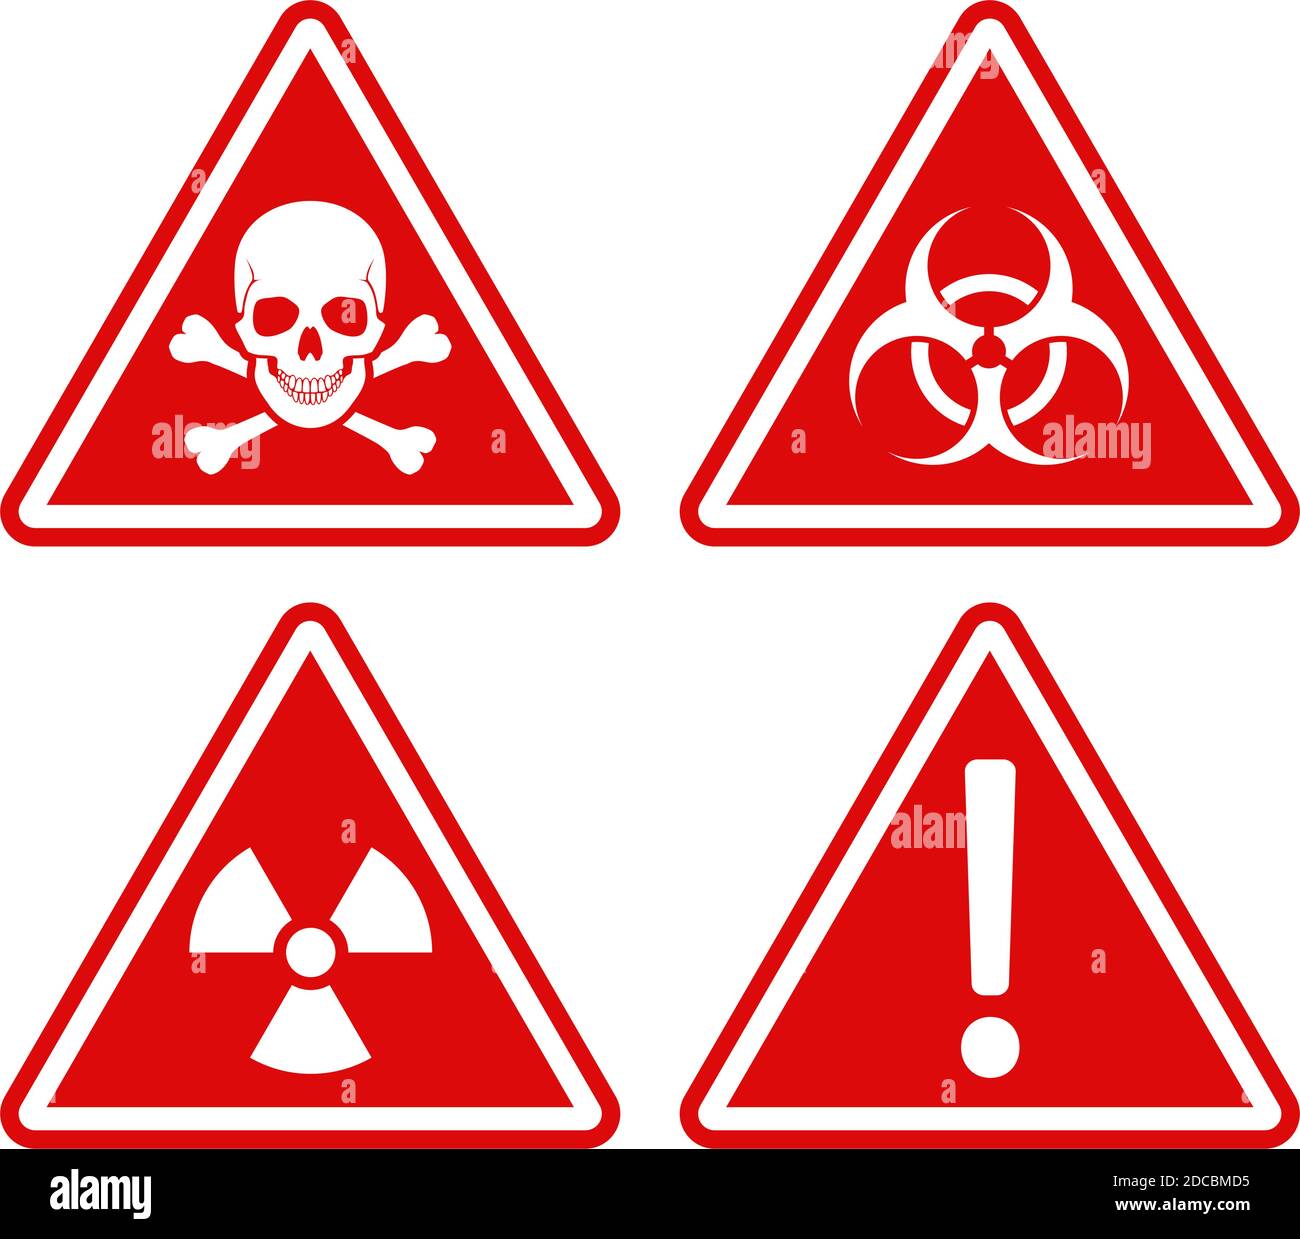 Red triangle warning or danger road sign with white frame vector illustration Stock Vector